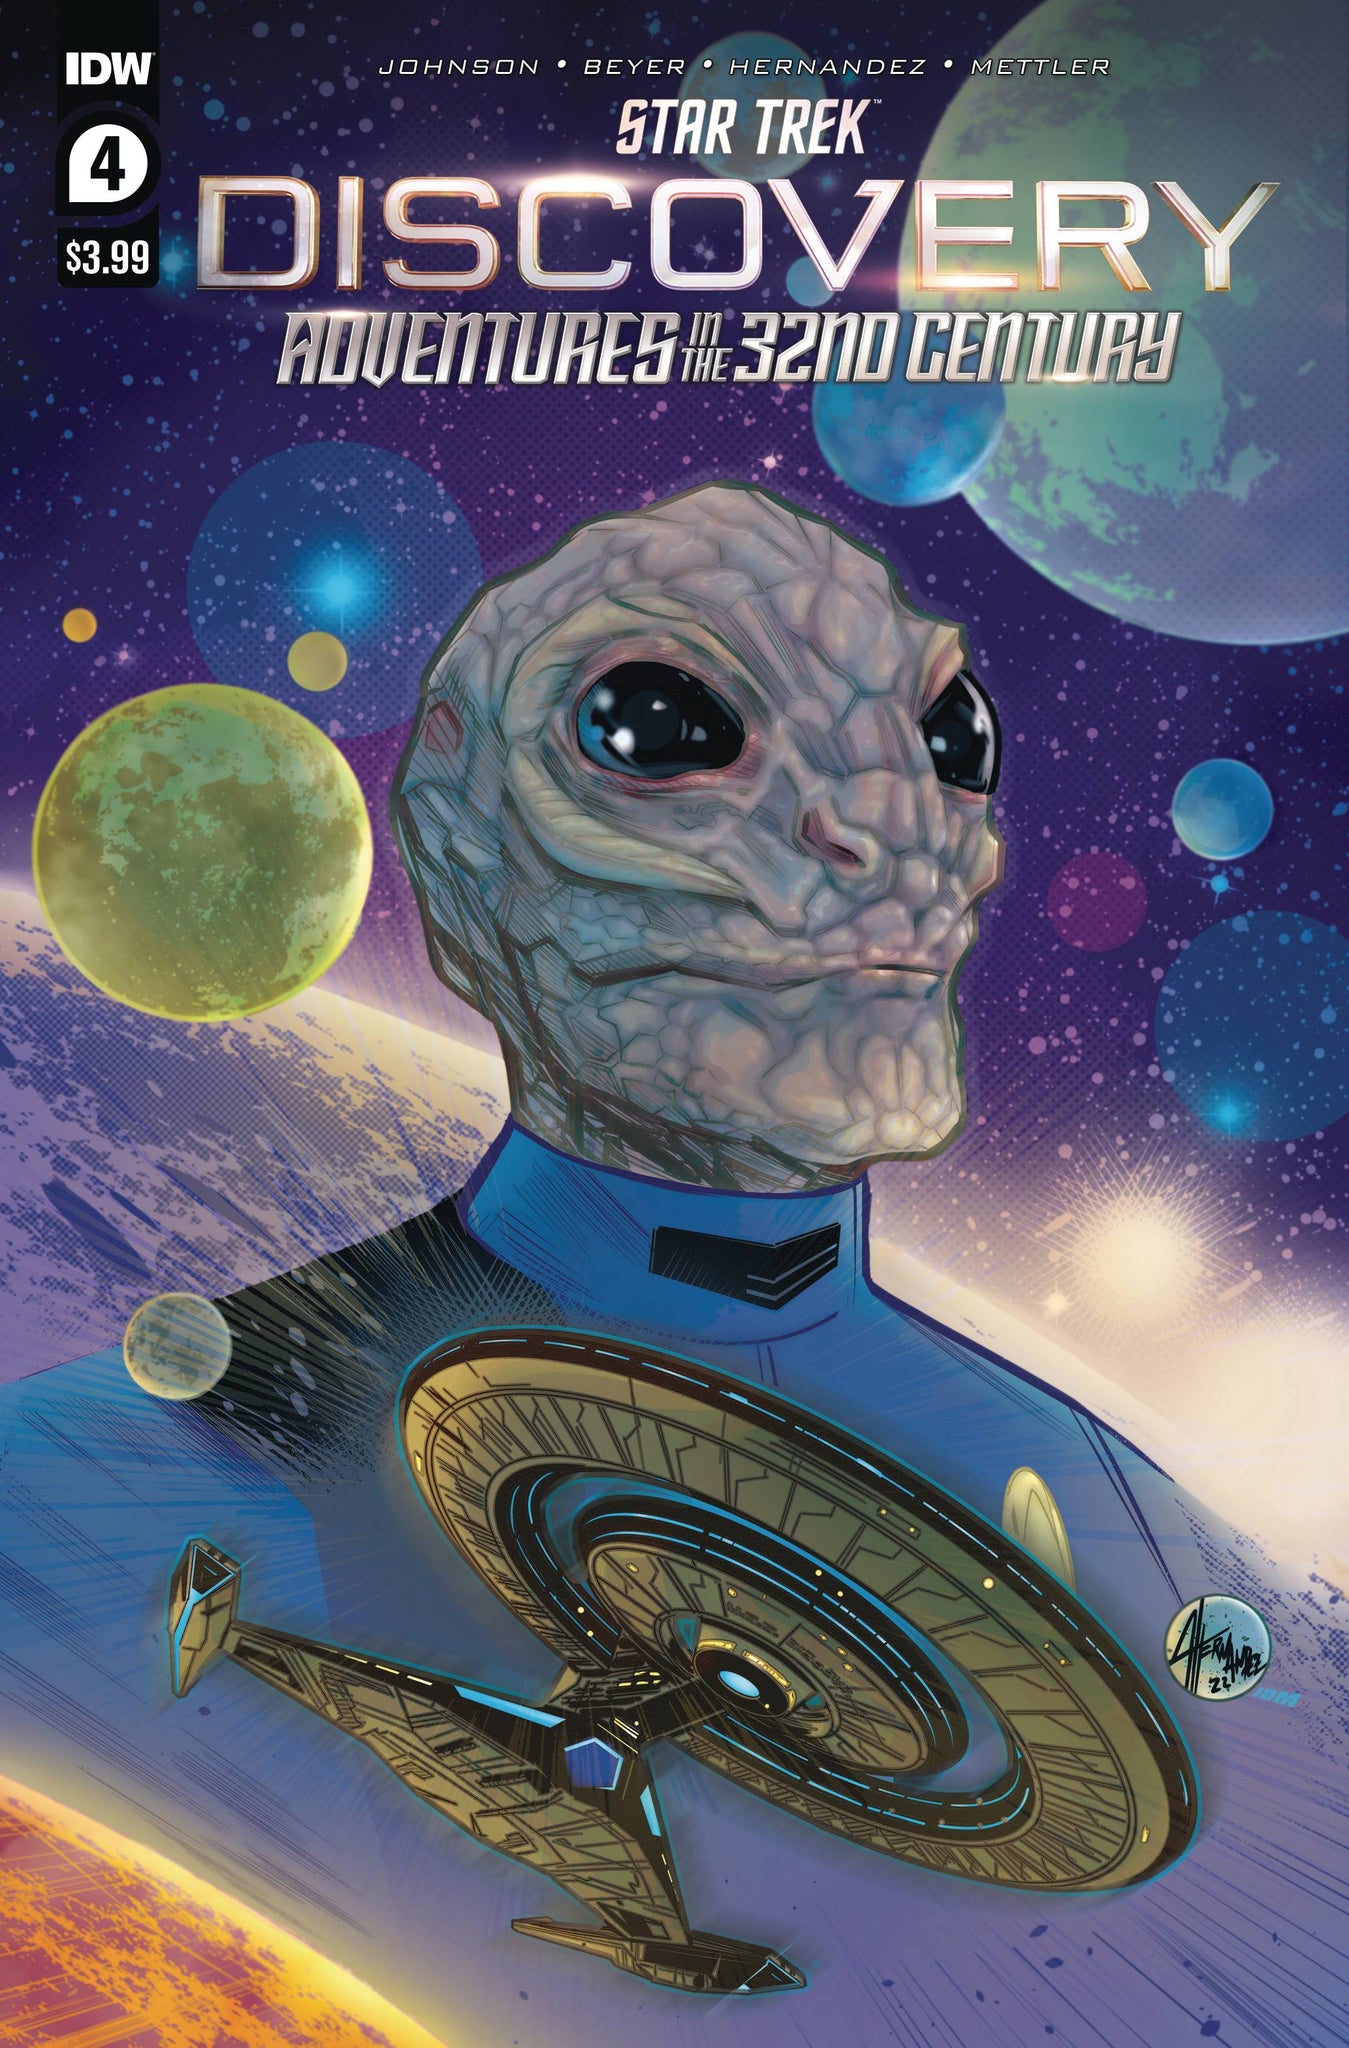 STAR TREK DISCOVERY ADVENTURES IN THE 32ND CENTURY #4 (OF 4)